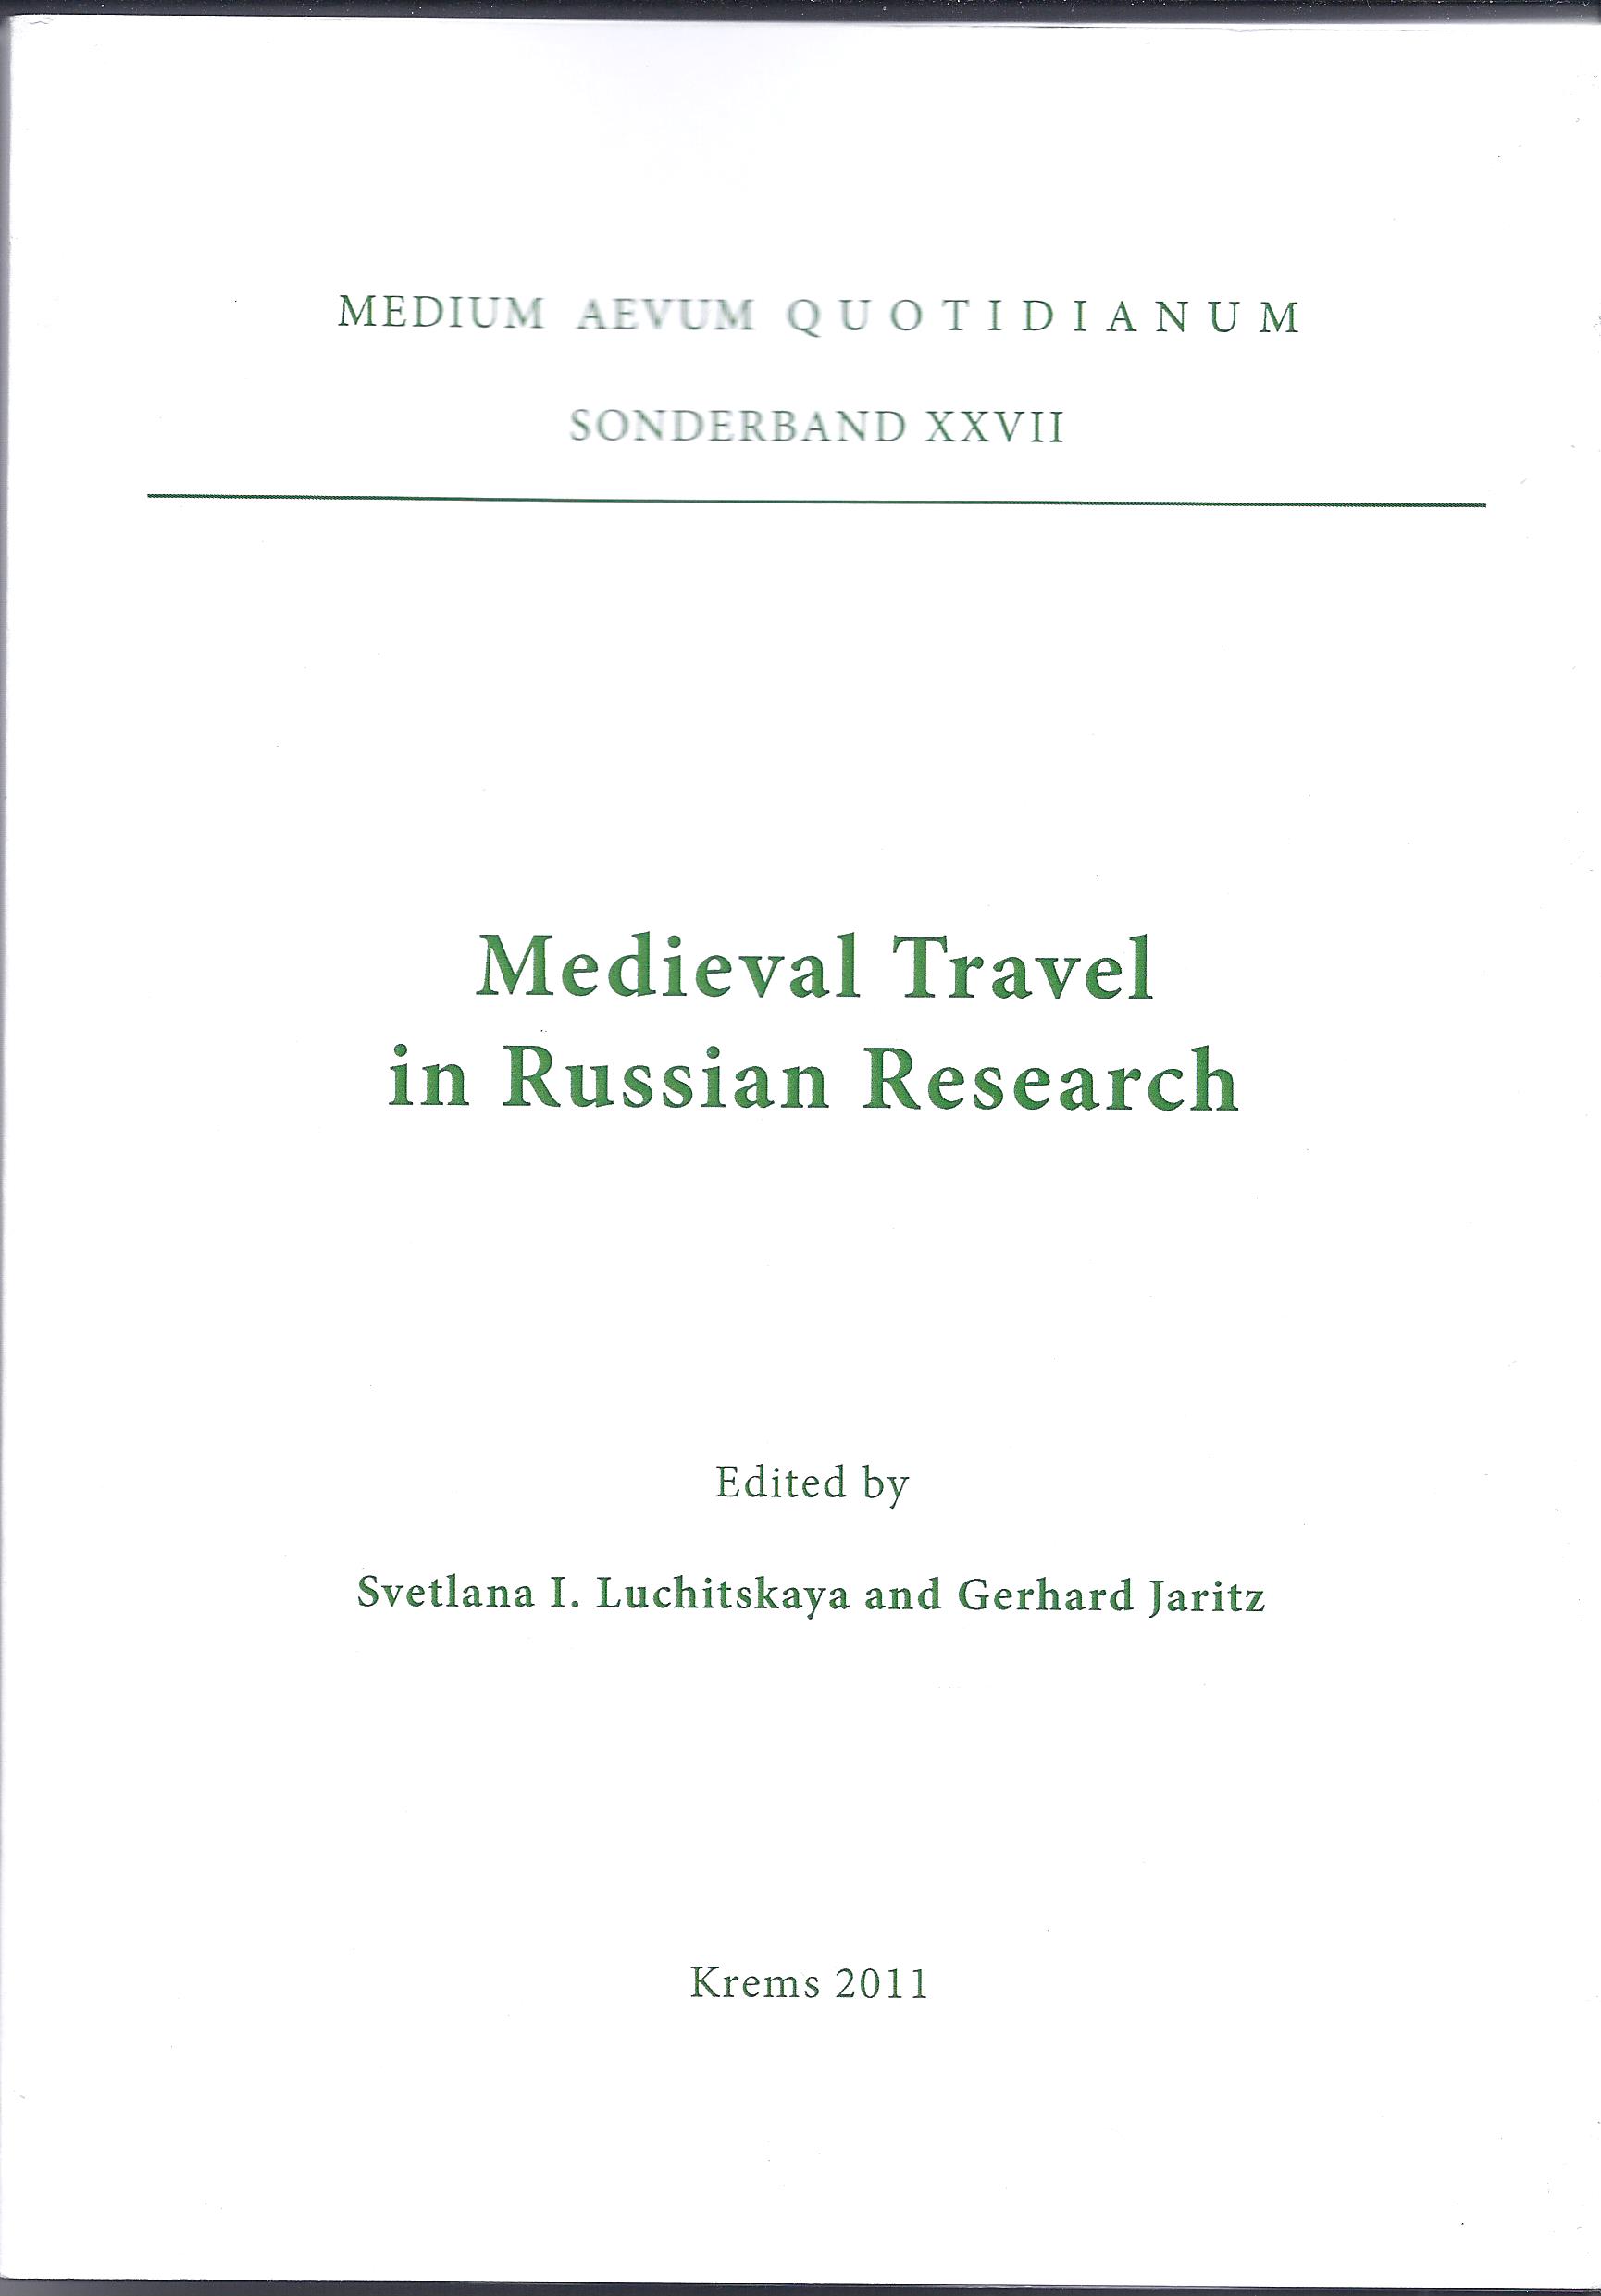 Medieval Travel in Russian Research